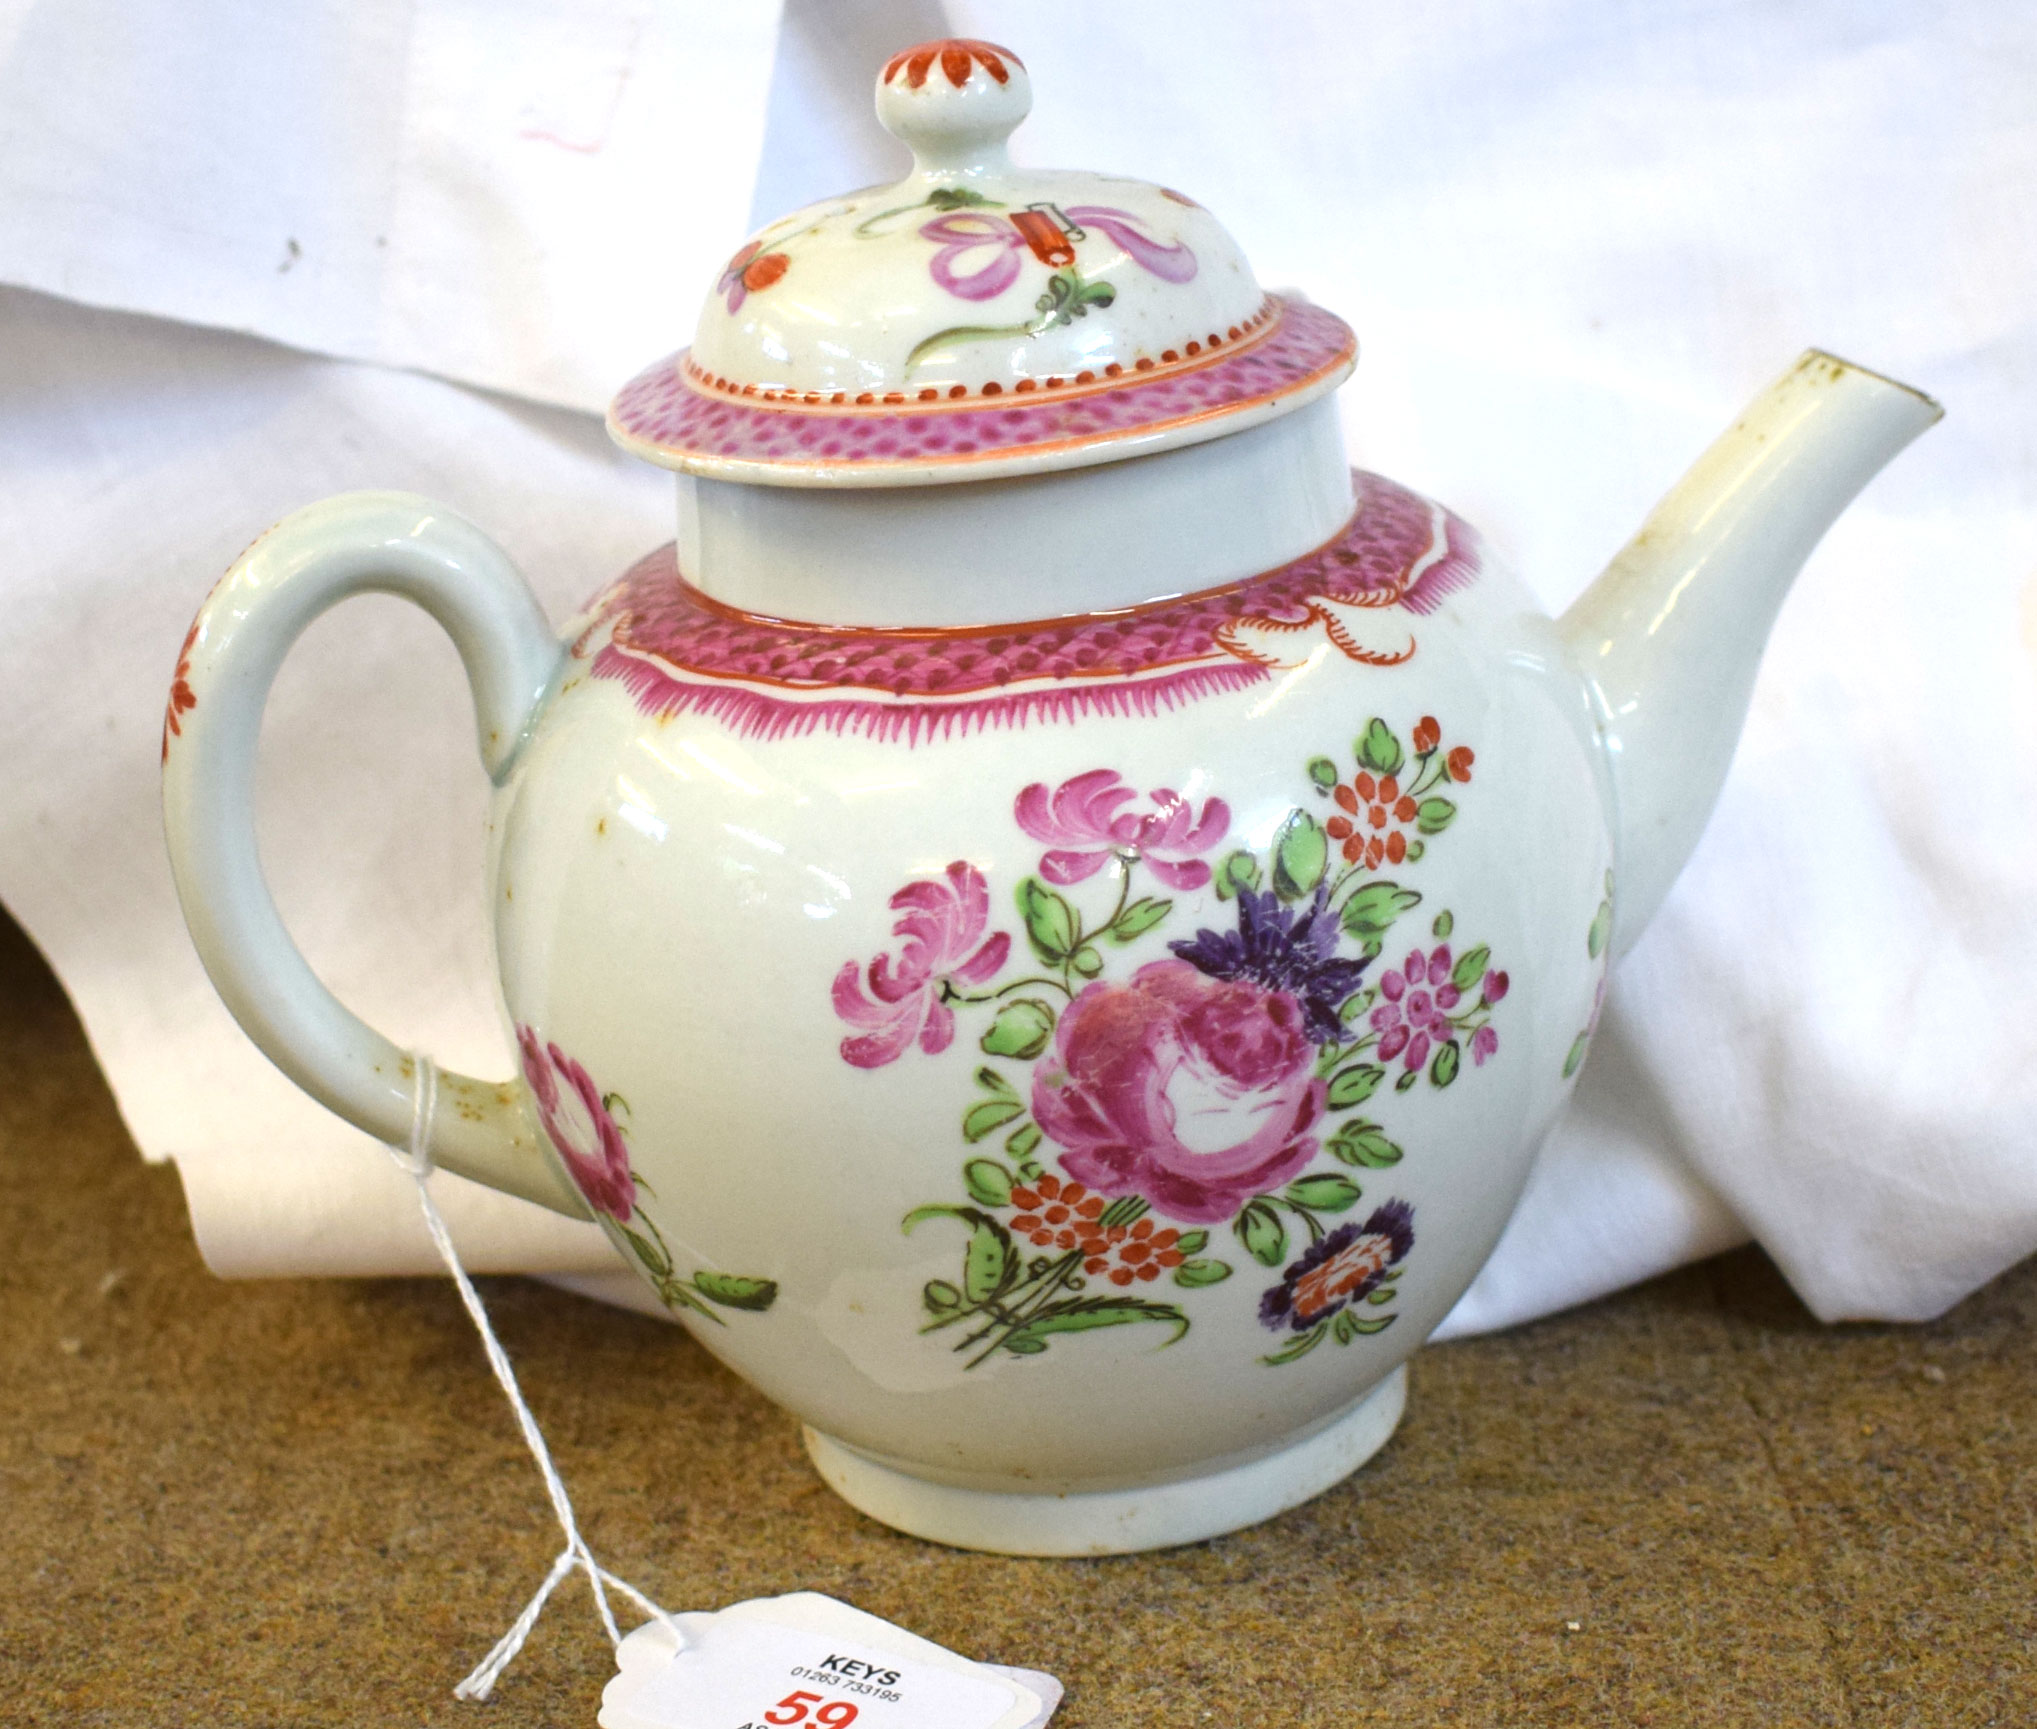 18th century Lowestoft porcelain tea pot decorated in Compagnie des Indes style with floral sprays